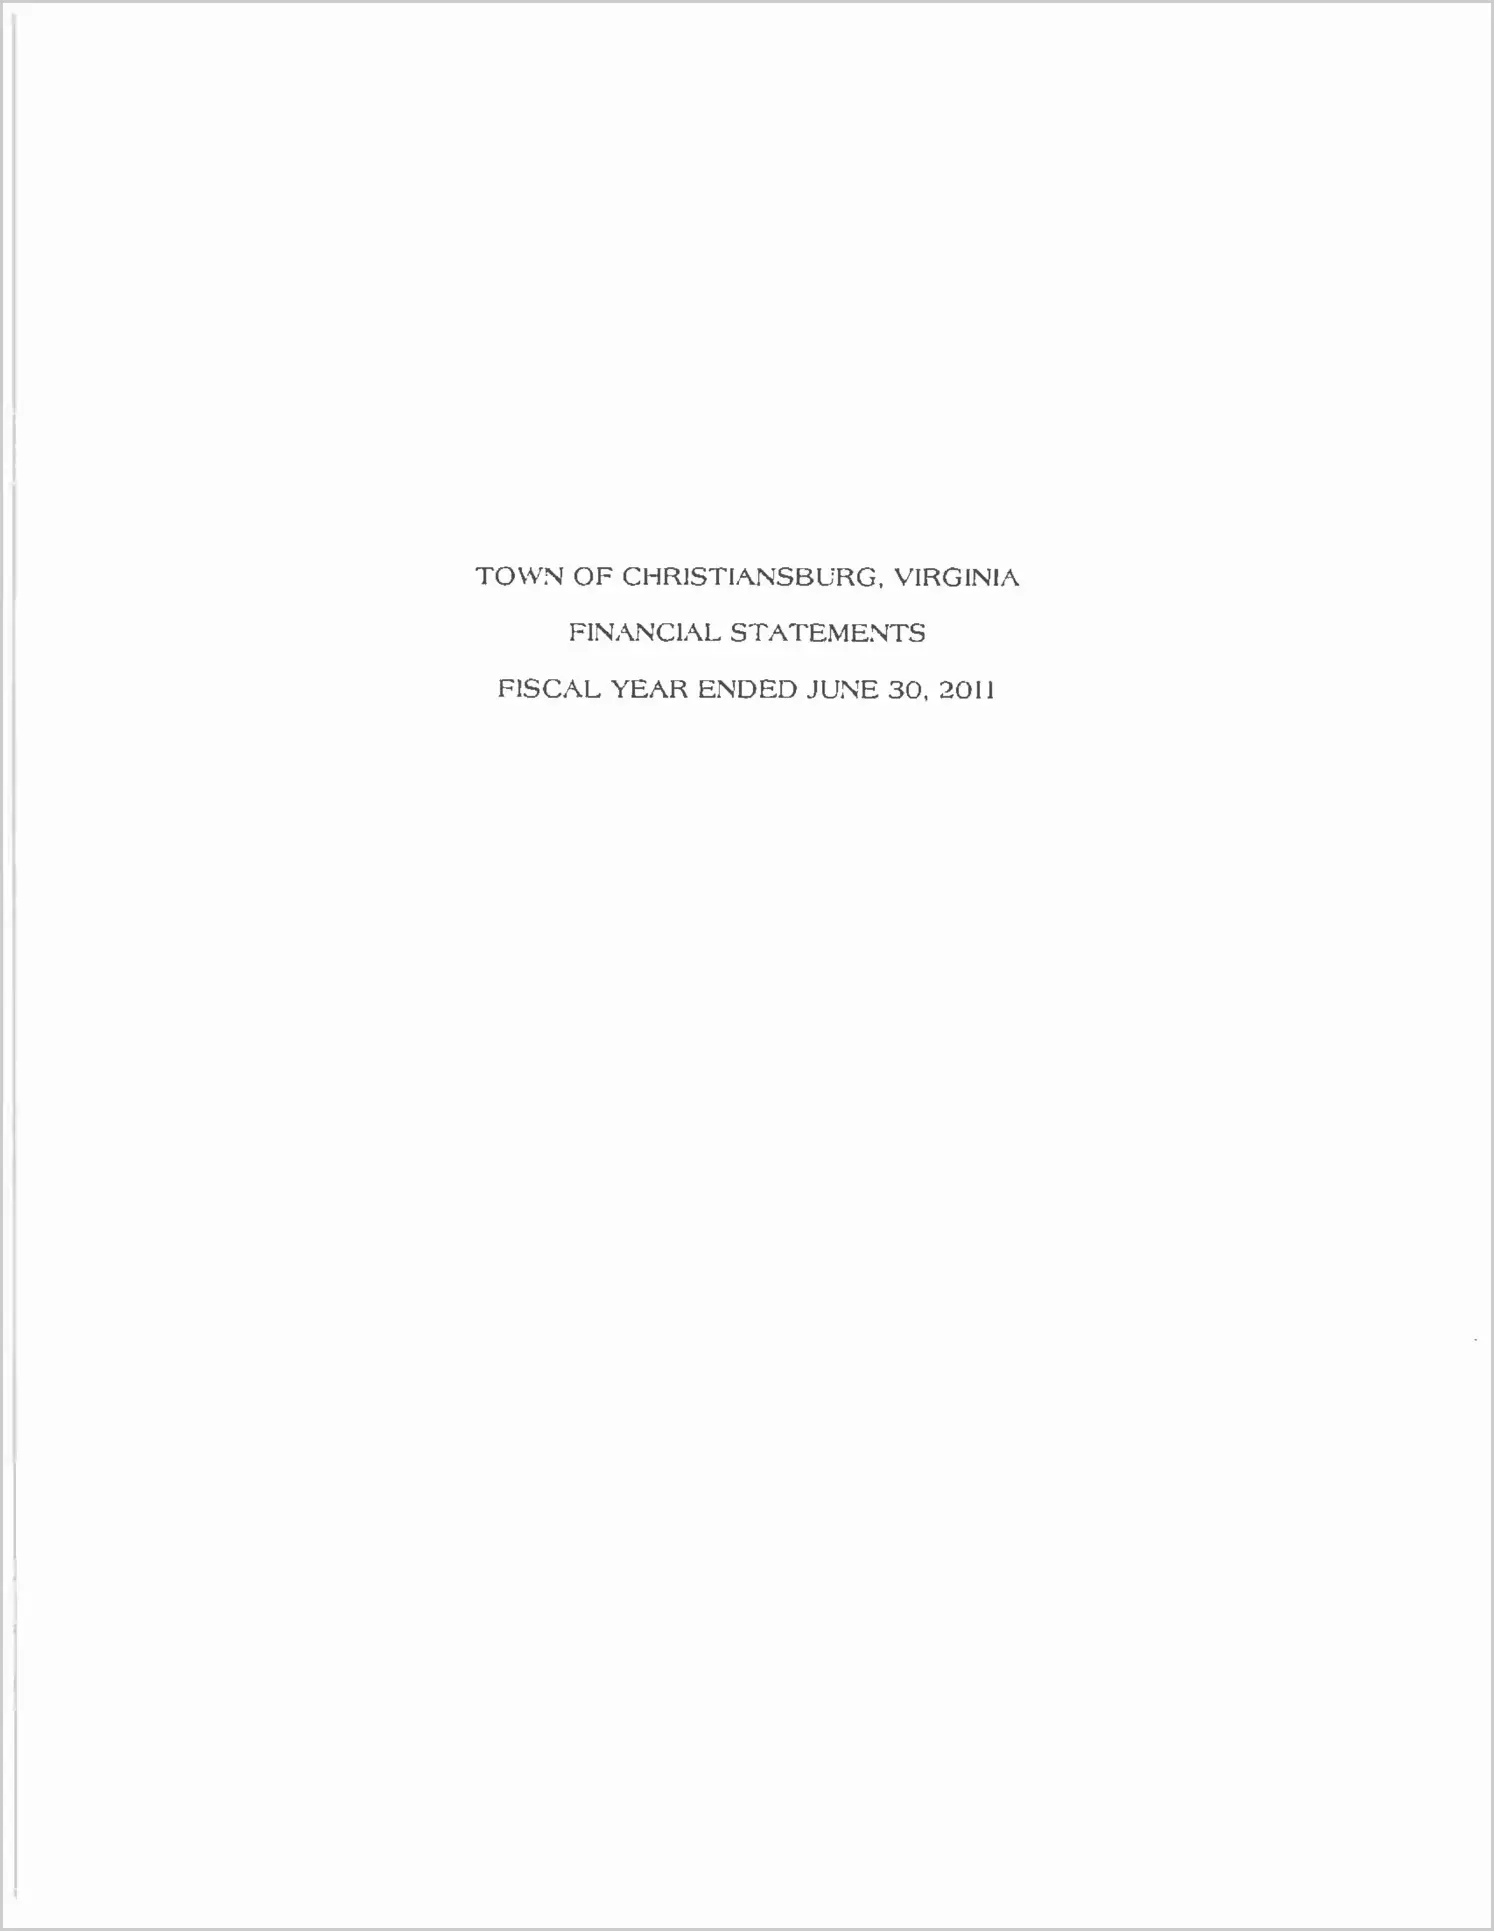 2011 Annual Financial Report for Town of Christiansburg